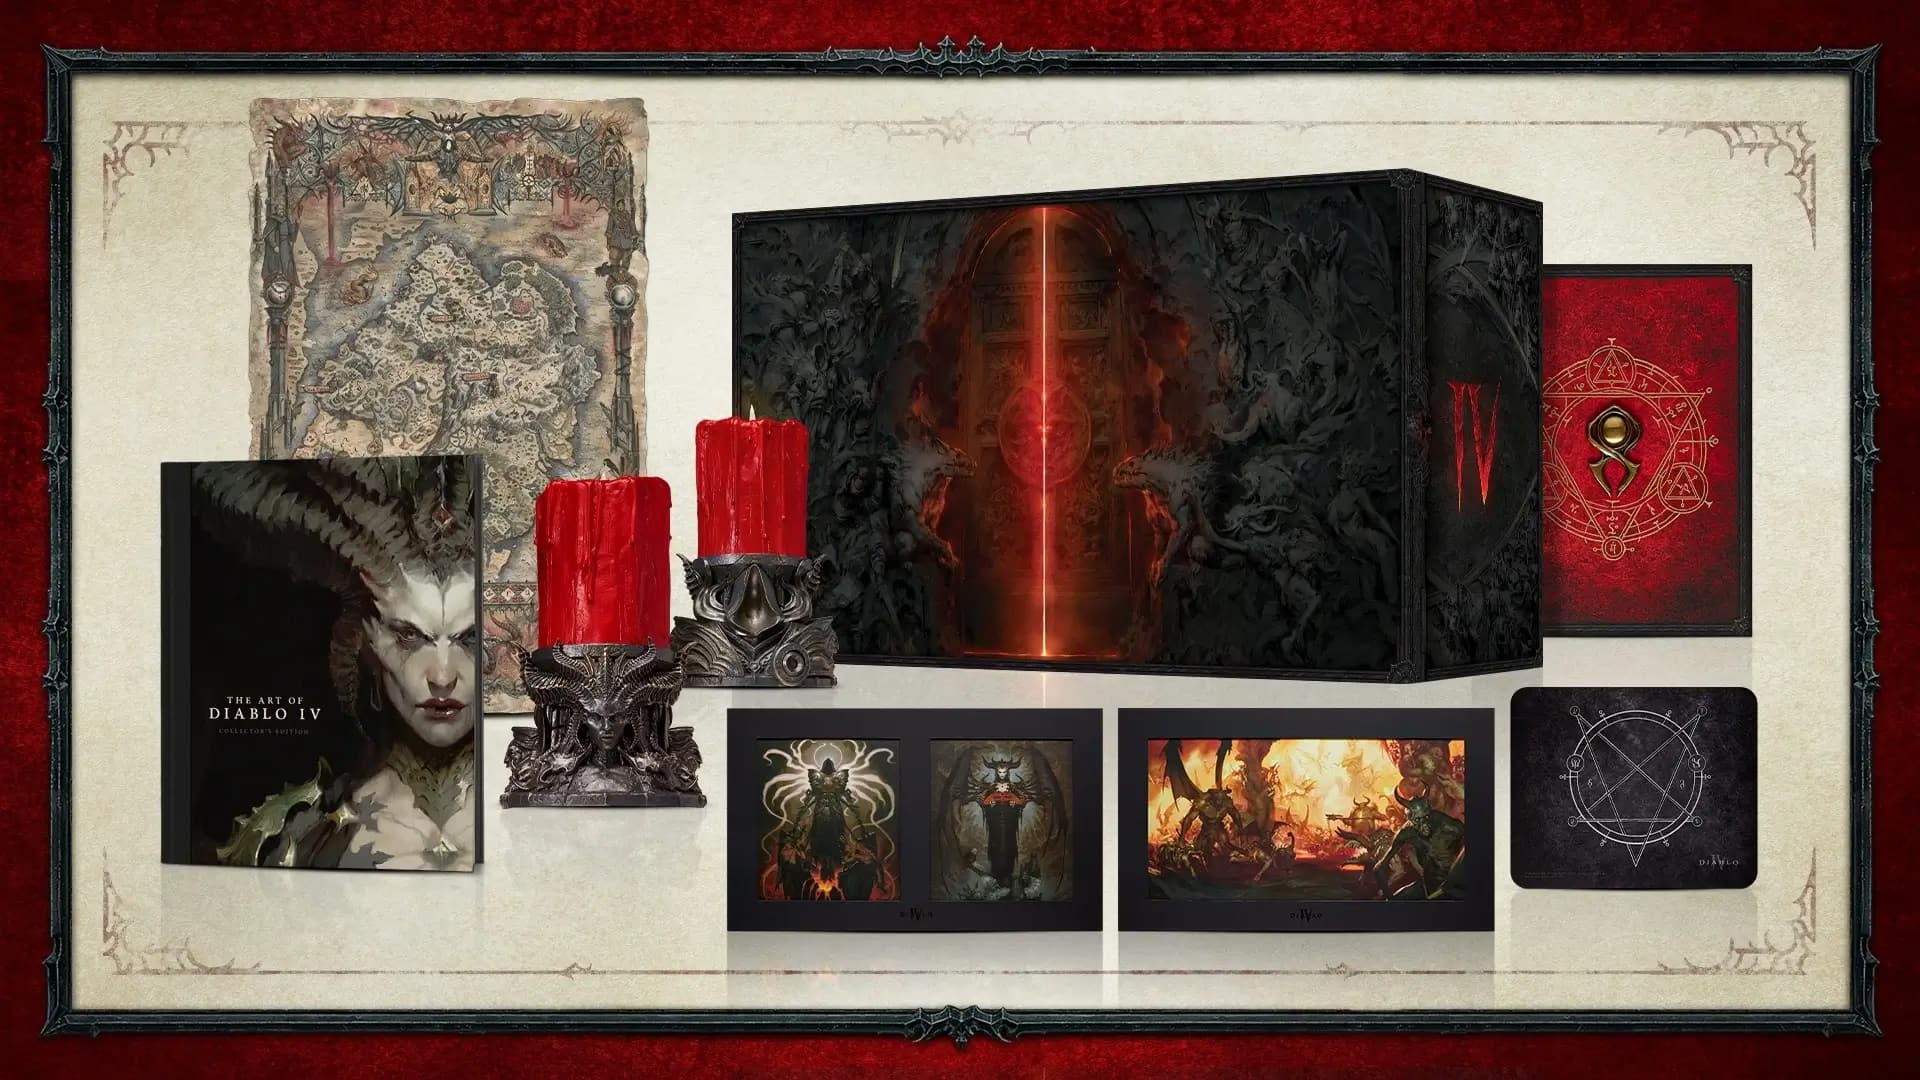 Diablo 4: Limited Collector's Box Without The Game Itself